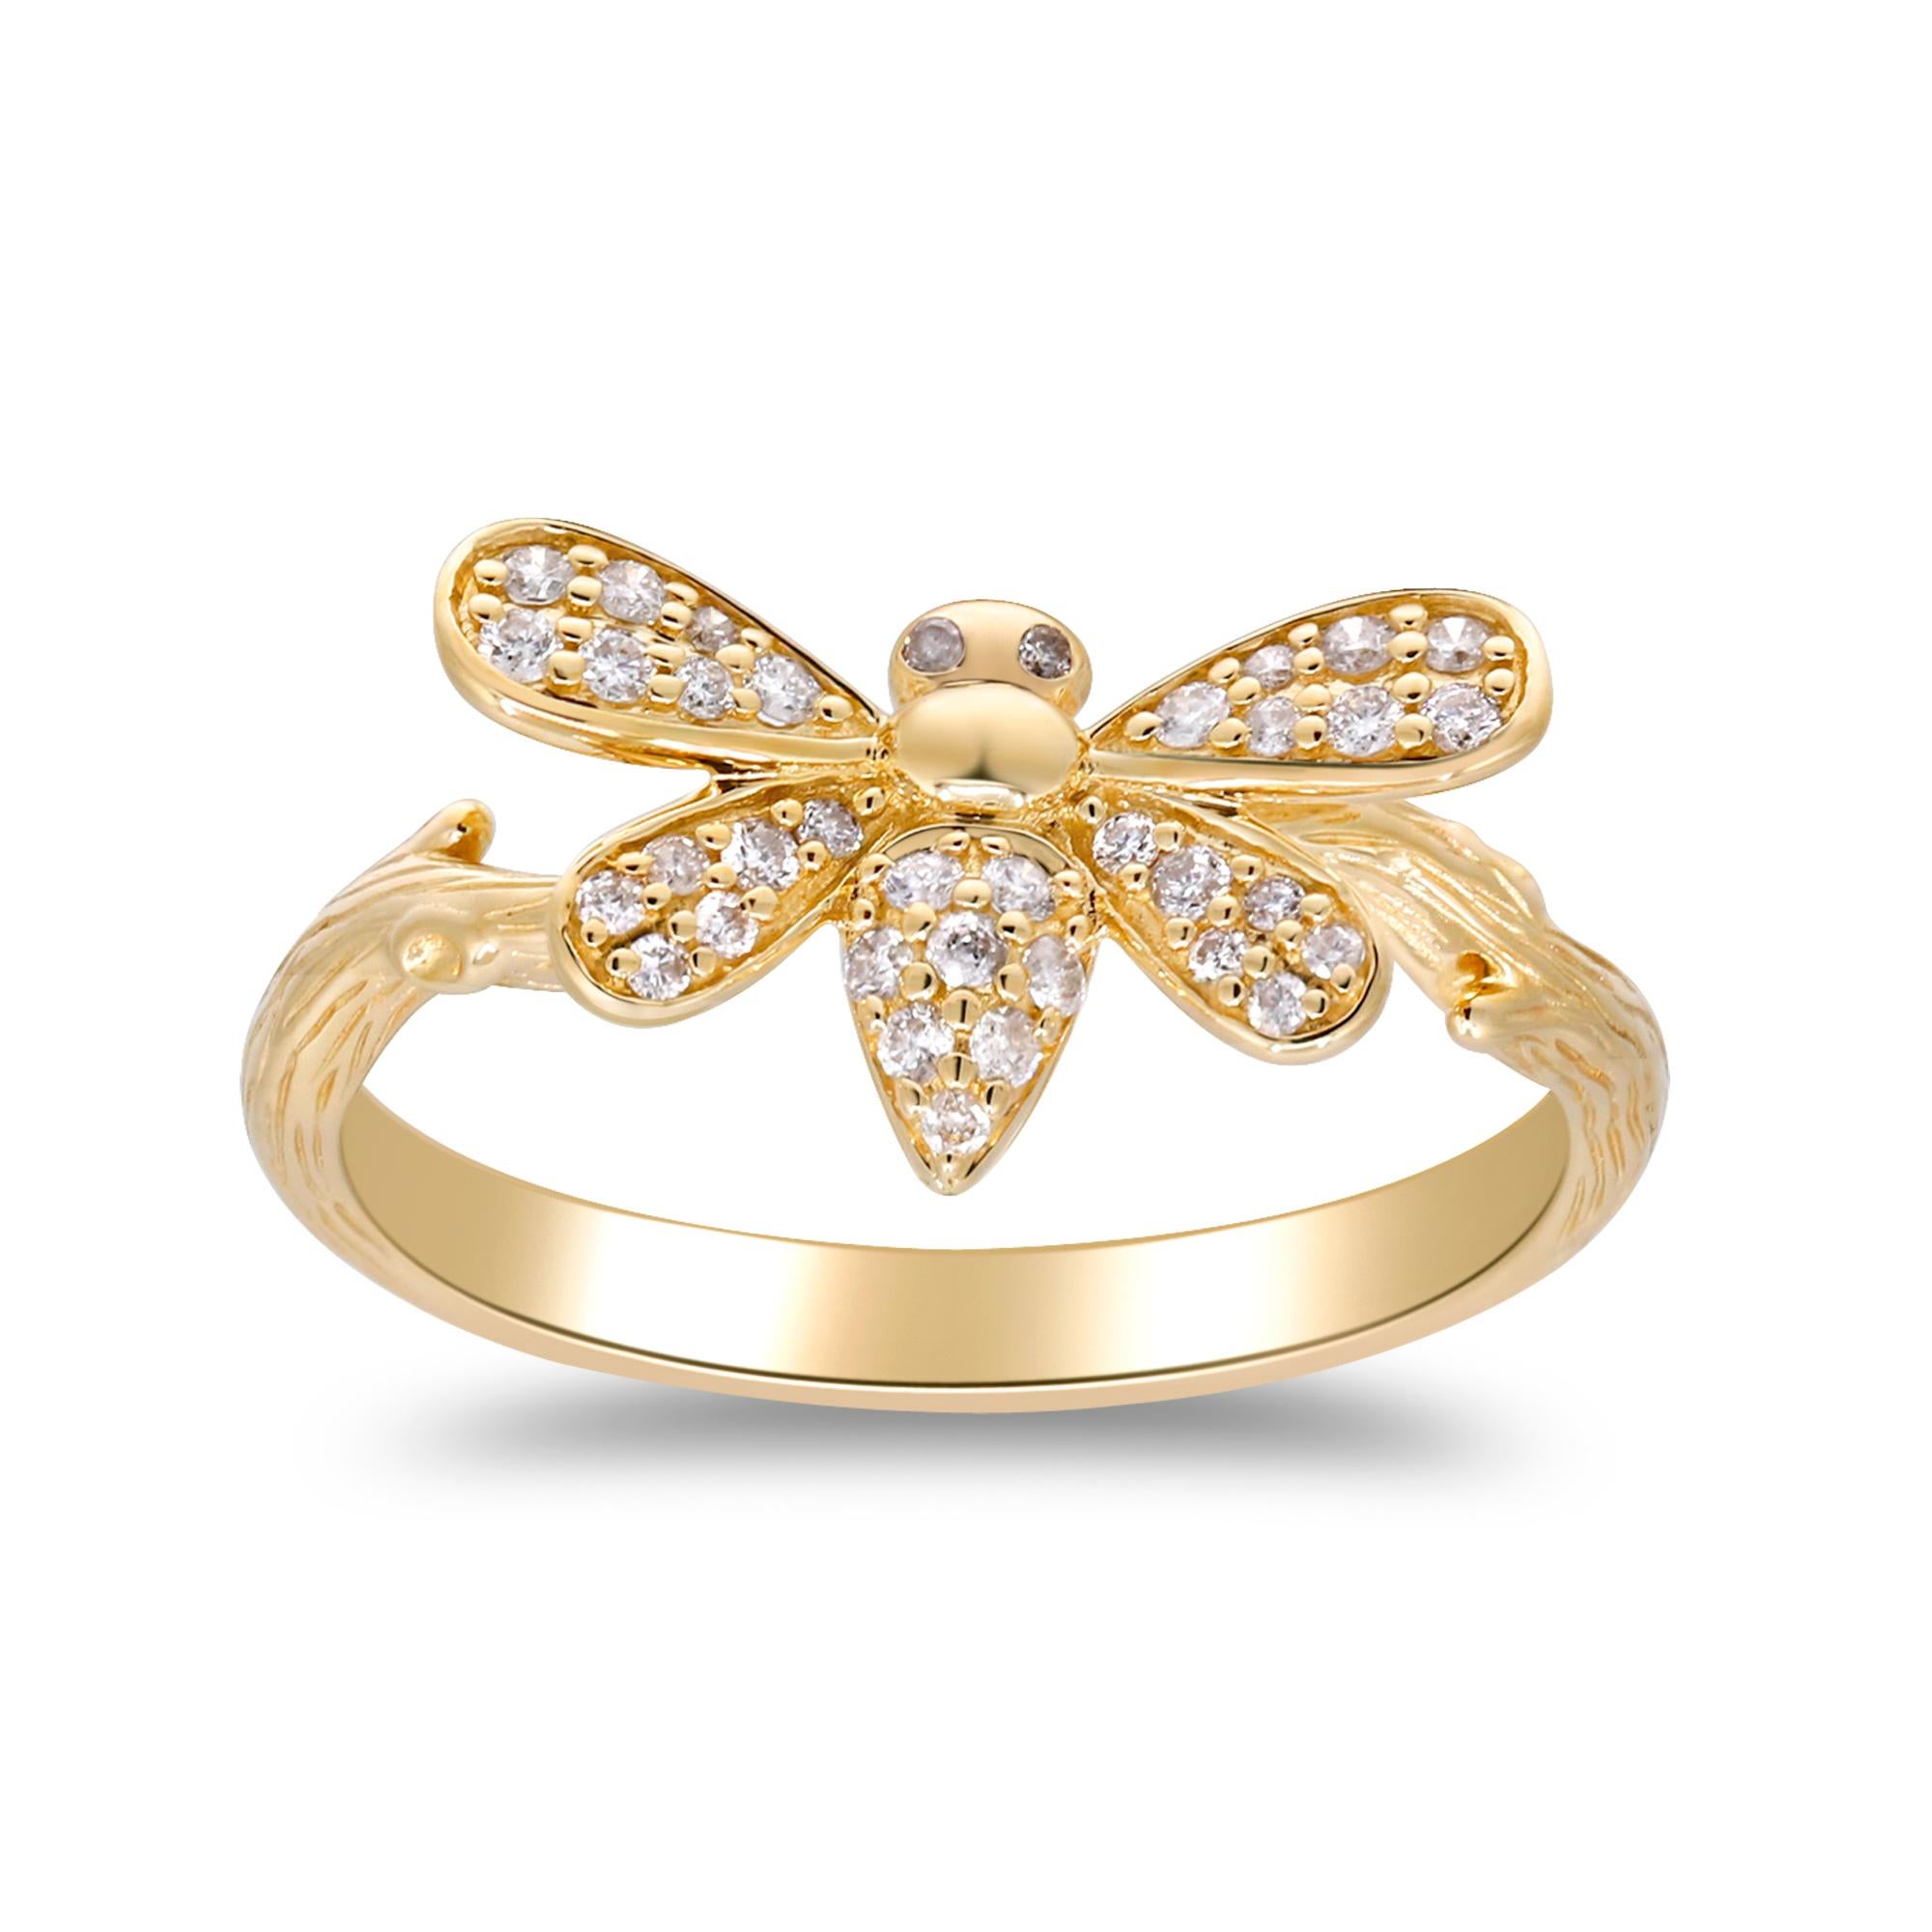 * Be like who glows no matter how the darkness grows. Crafted in 14K yellow gold, this ring features a diamond firefly that shines as if in mid-flight. Dainty and shimmering, this ring is sure to cherish.
* The Smithsonian Jewelry collection which